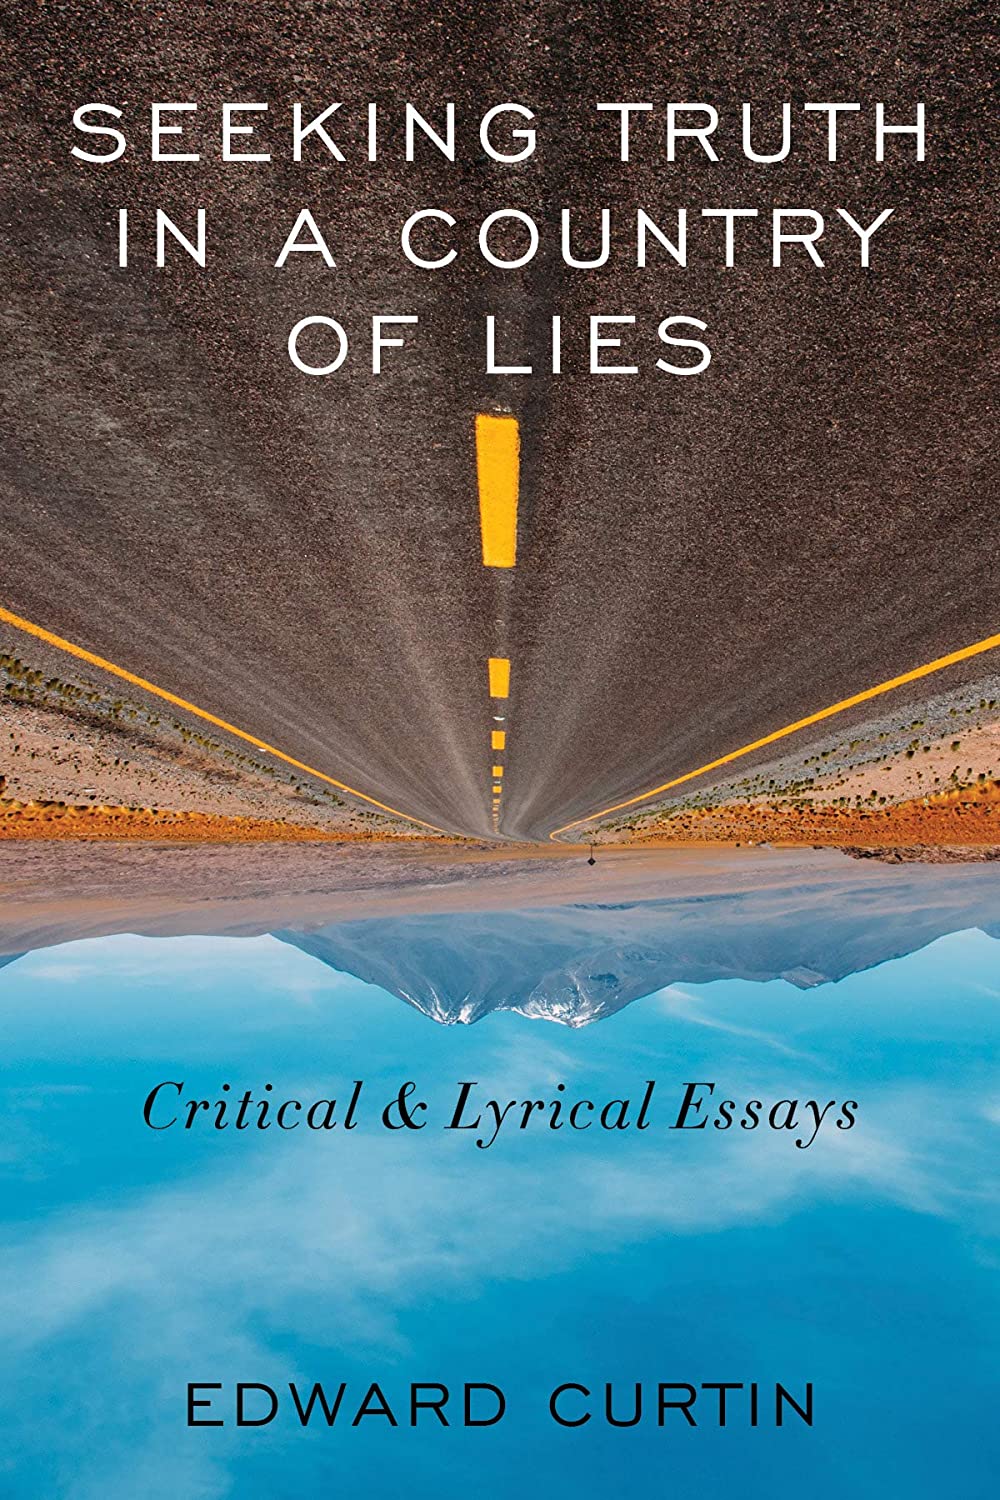 Nothing Ever Happened A review of Seeking Truth in a Country of Lies, by Edward Curtin.